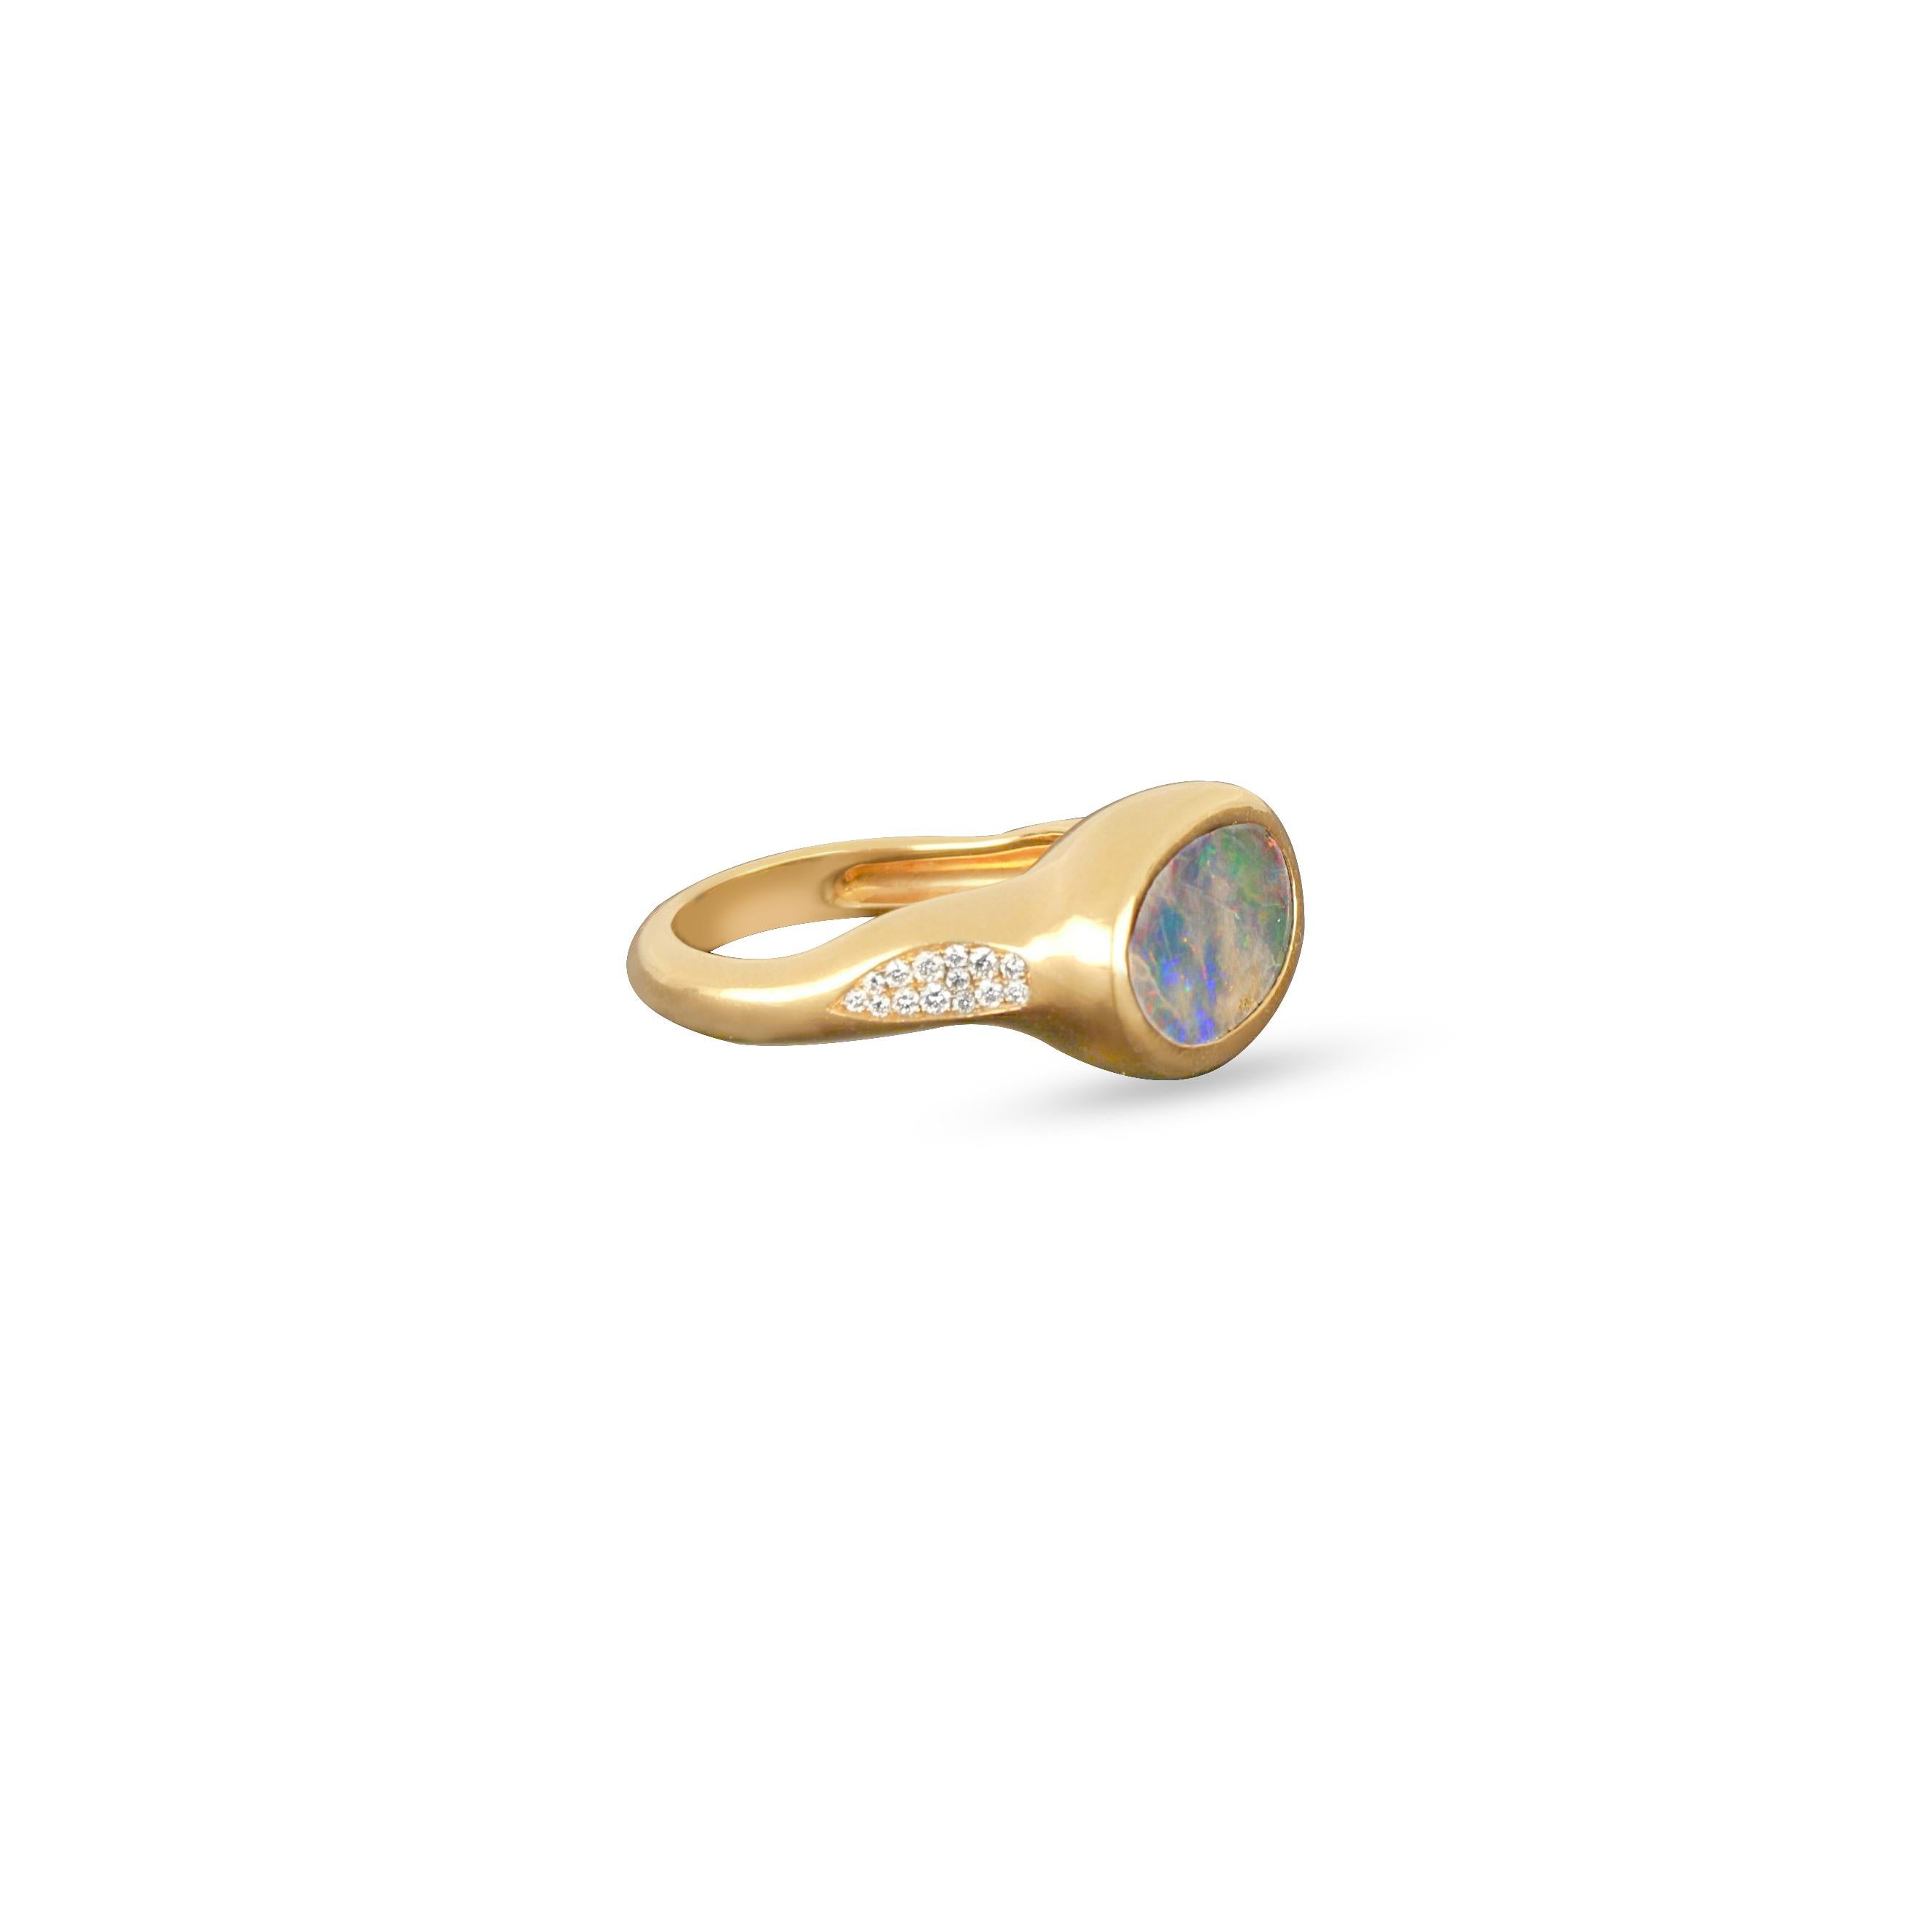 This exquisite 18K rose gold ring features a mesmerising opal centre stone, reminiscent of a celestial galaxy with its play of colours. Surrounding the opal are delicate round cut diamonds, adding a touch of sparkle that enhances the celestial